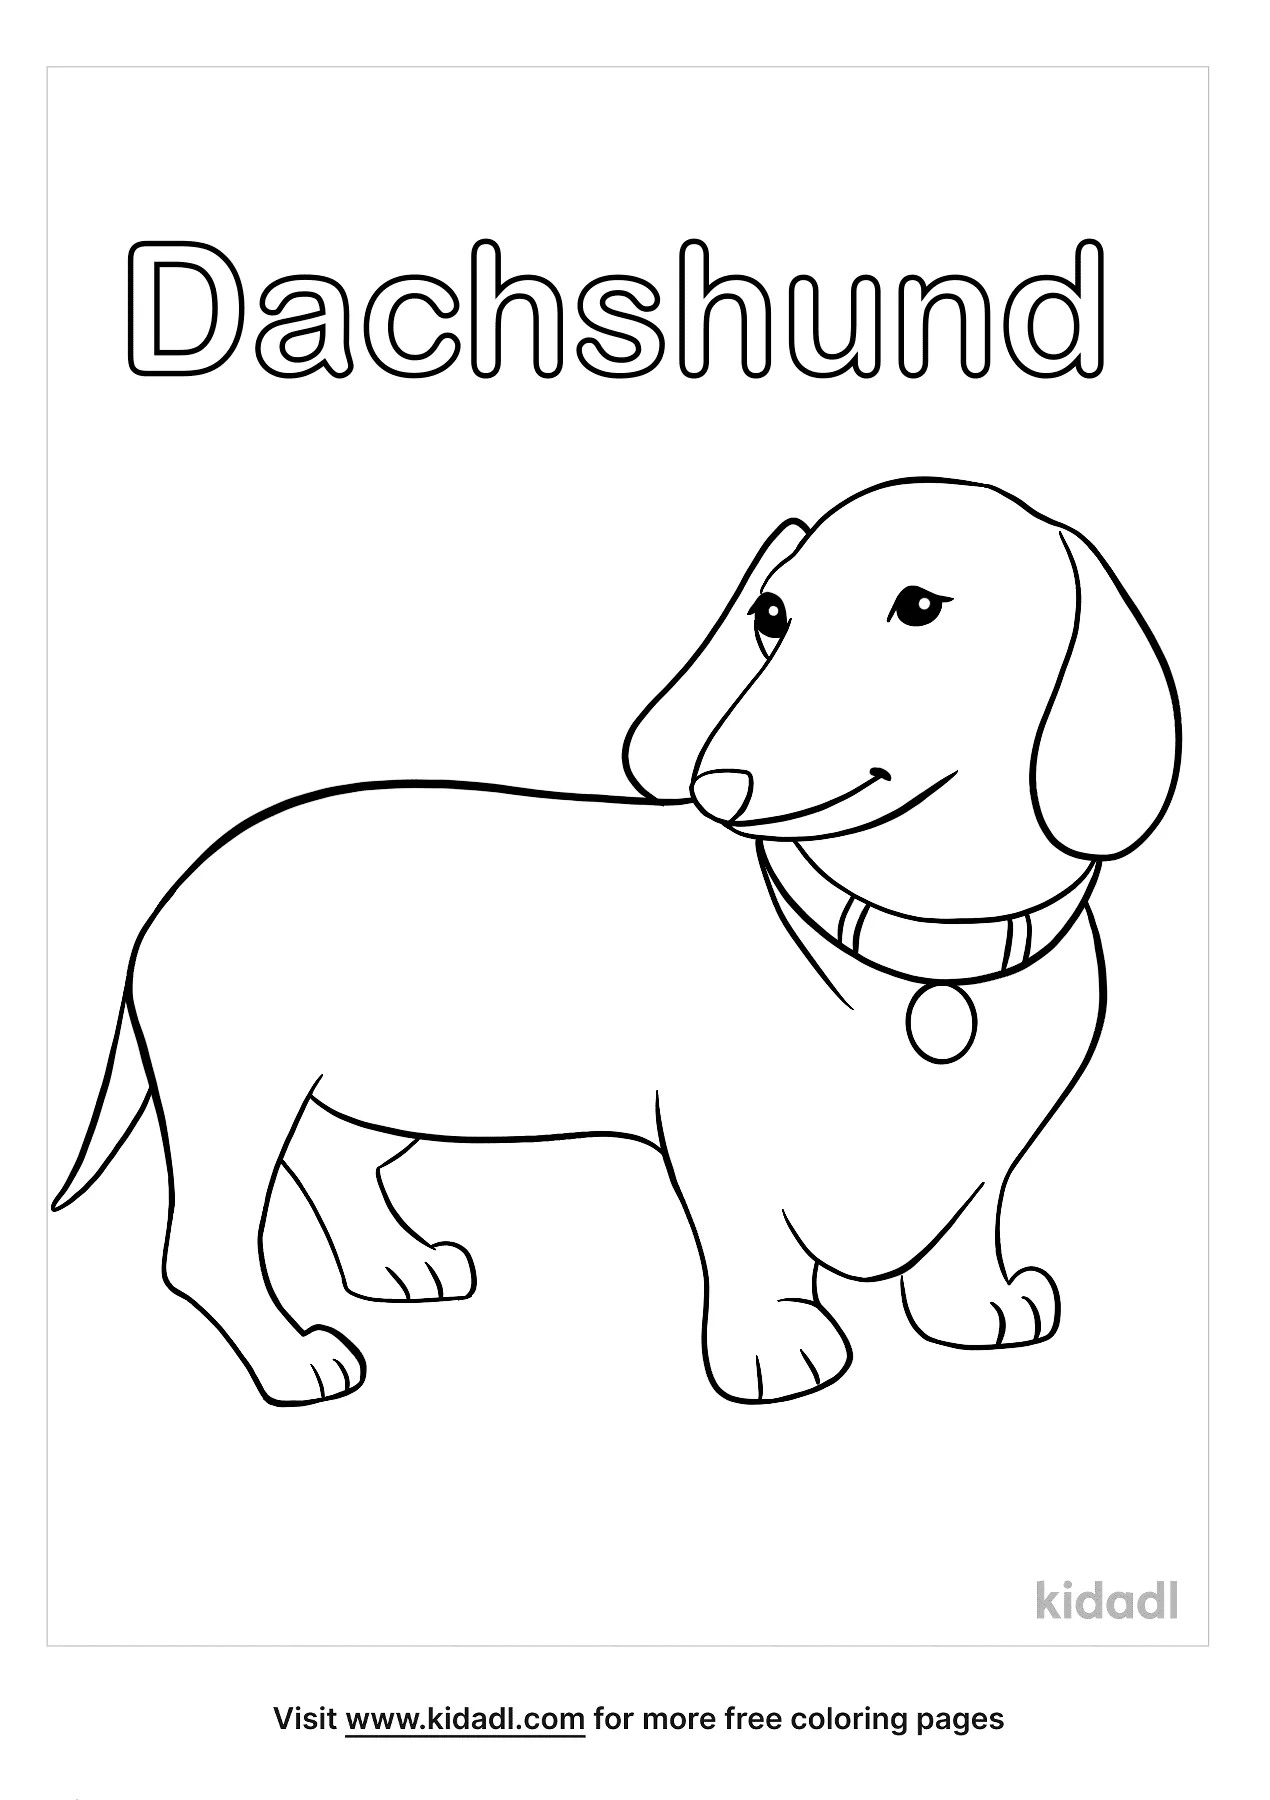 Dachshund Puppy Birthday Coloring Page / Dog Box Coloring Page For